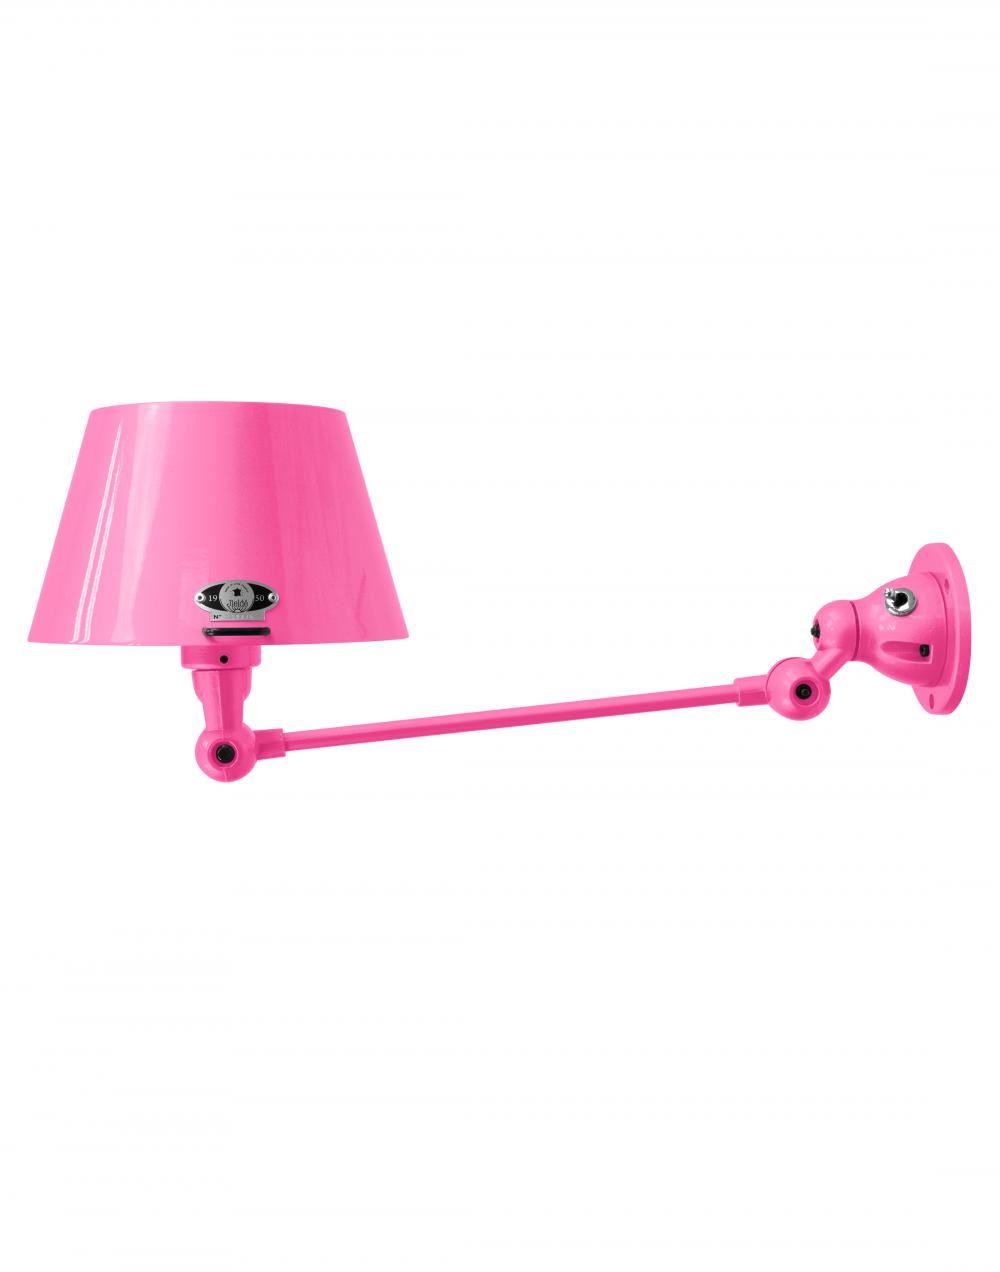 Jielde Aicler One Arm Adjustable Wall Light Straight Shade Pink Gloss Integral Switch On Wall Base